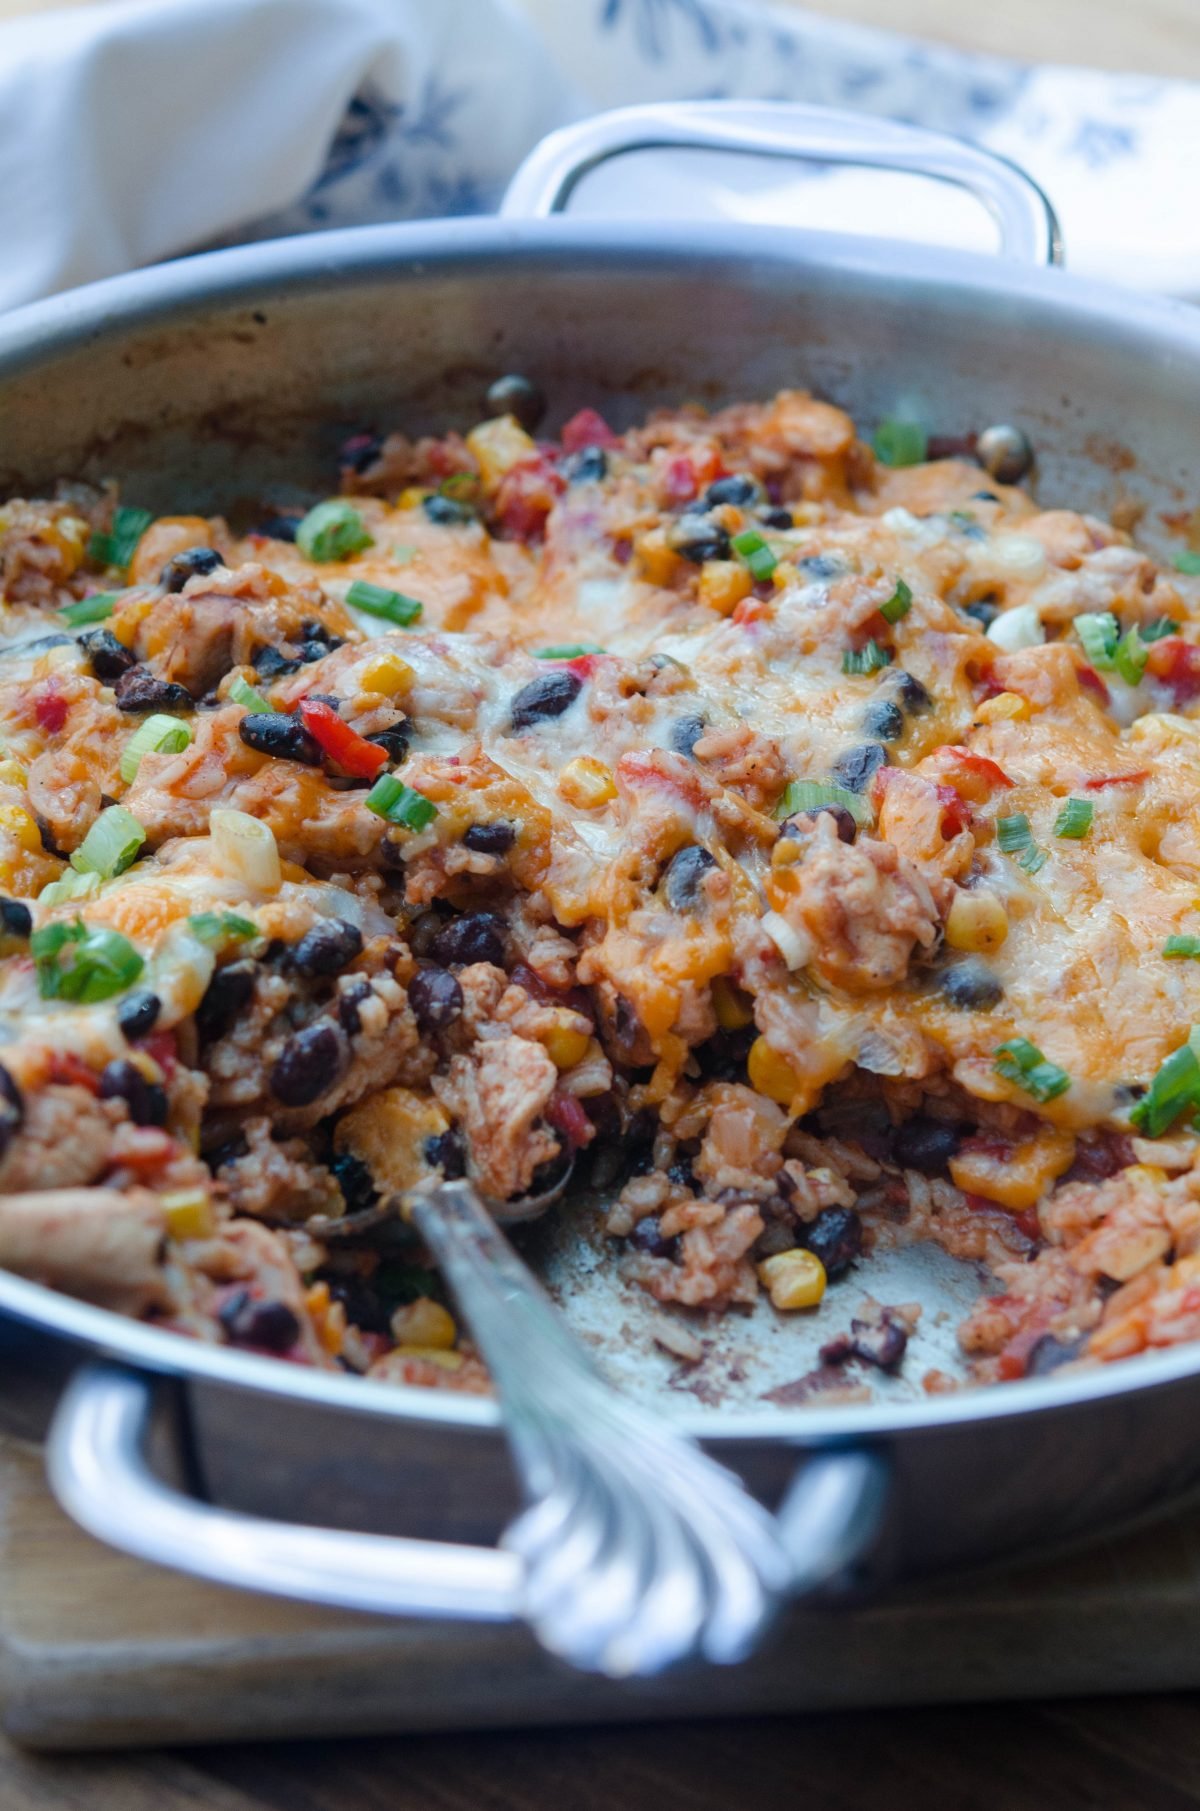 A spoon scoops up some Tex-Mex Chicken and Rice from the skillet.